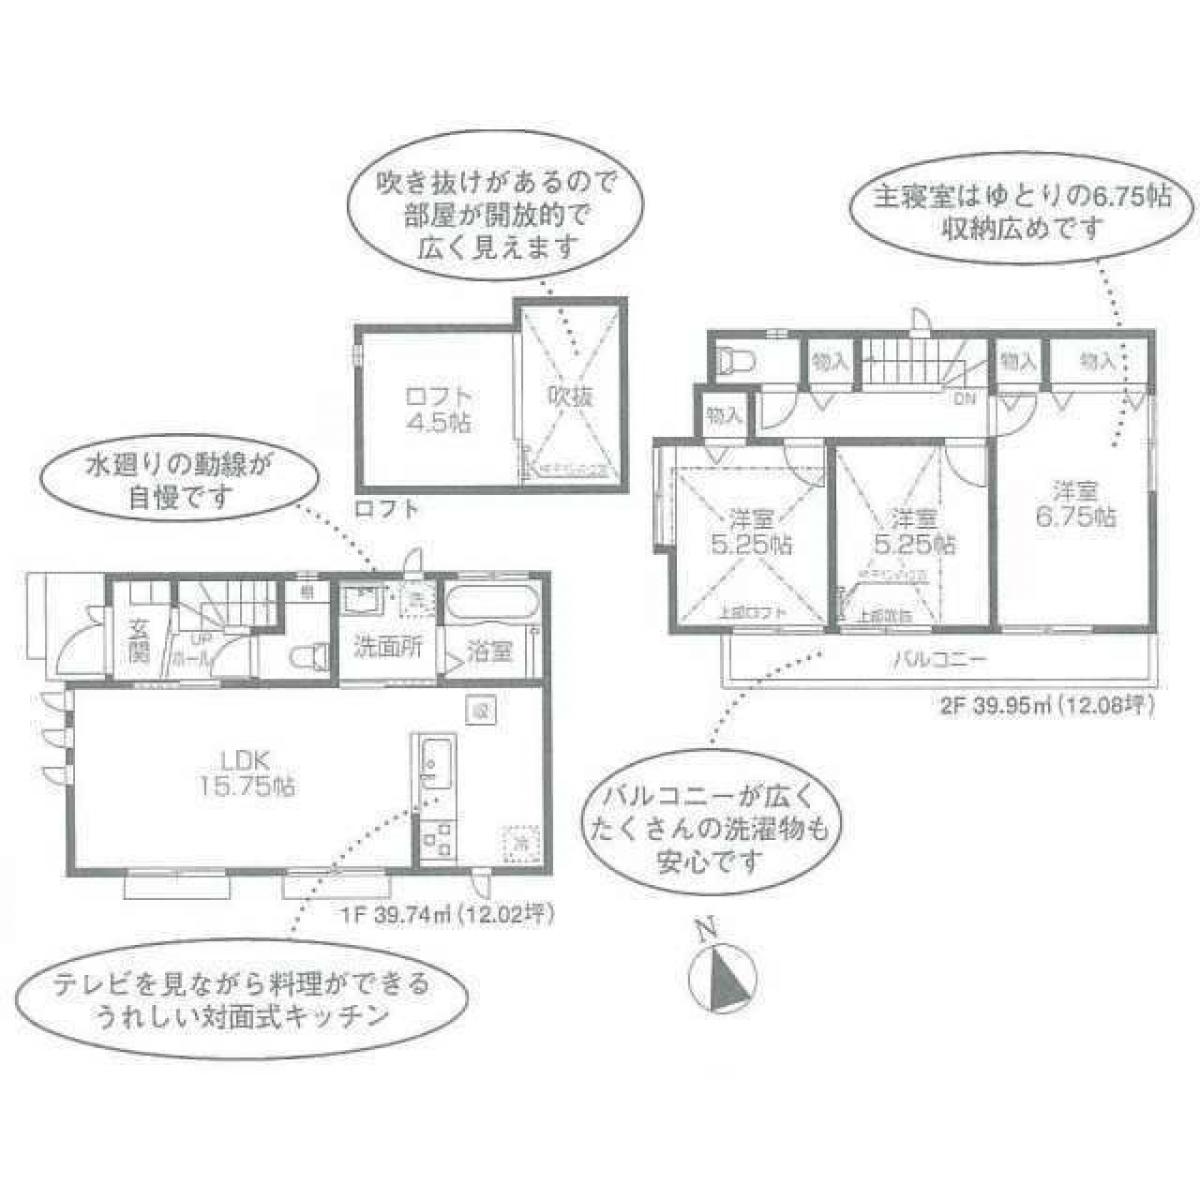 Picture of Home For Sale in Nakano Ku, Tokyo, Japan